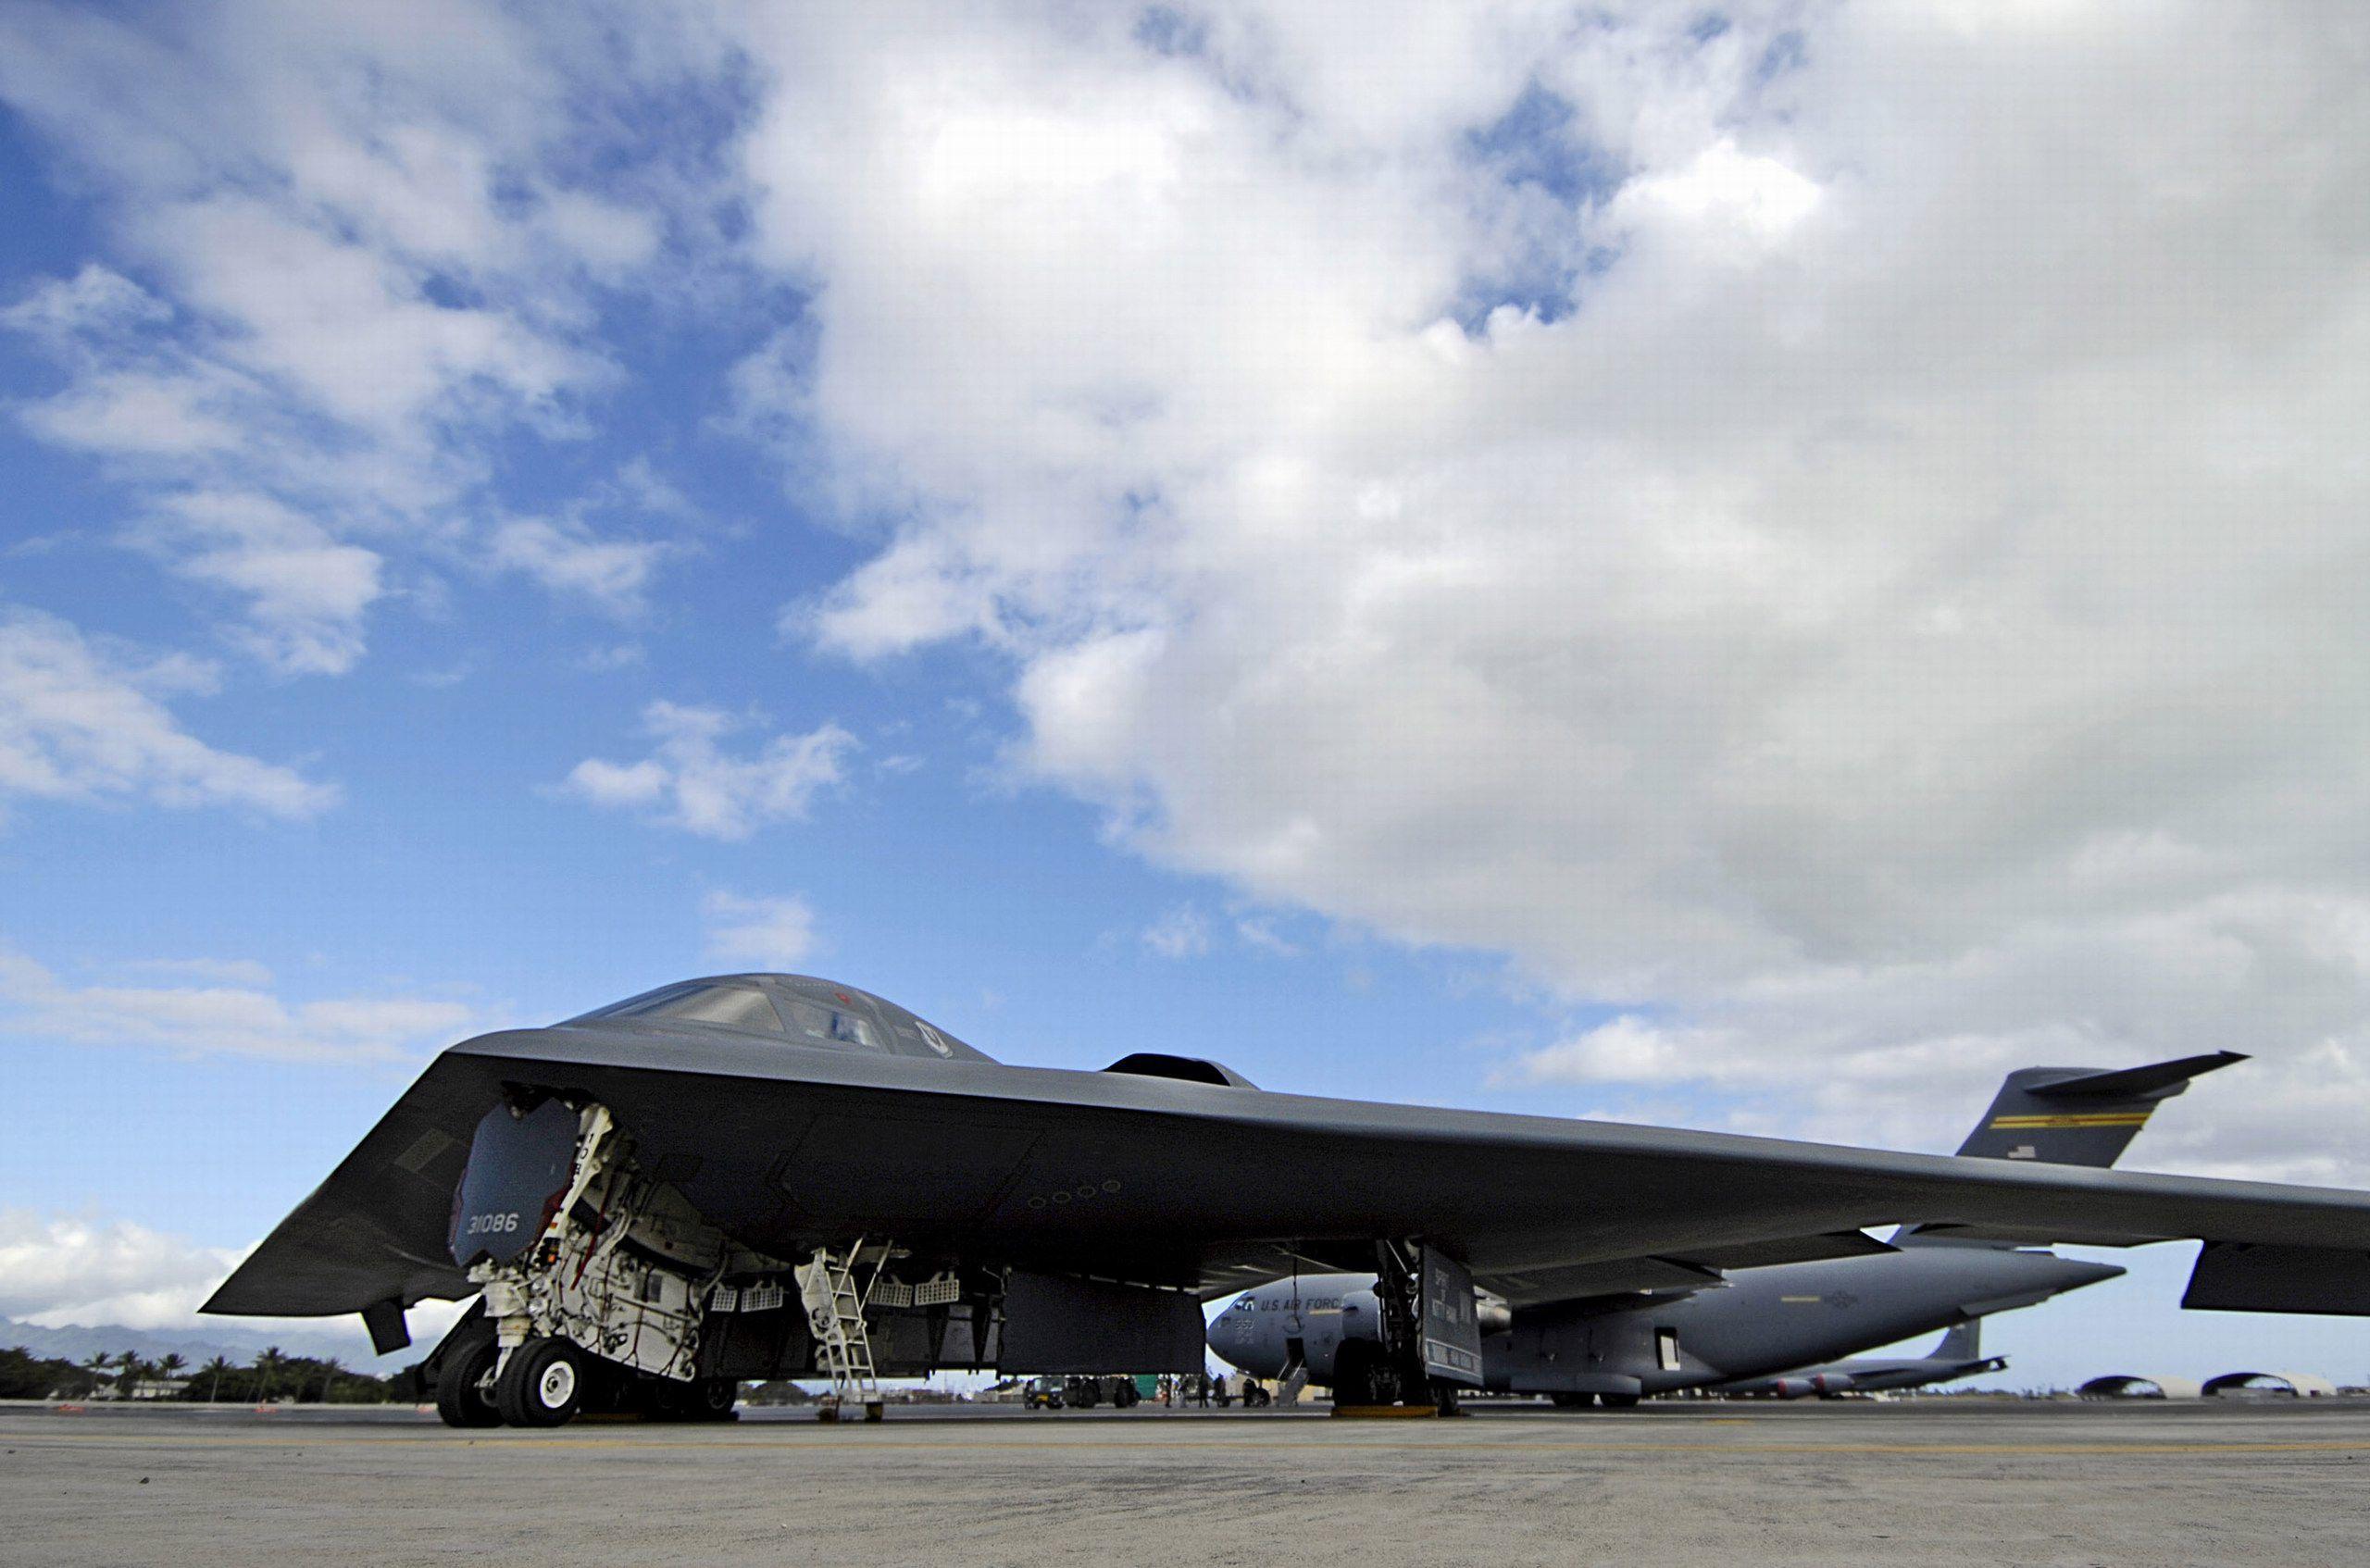 U.S. Air Force&;s B 2 Stealth Bomber. United States, USA Picture